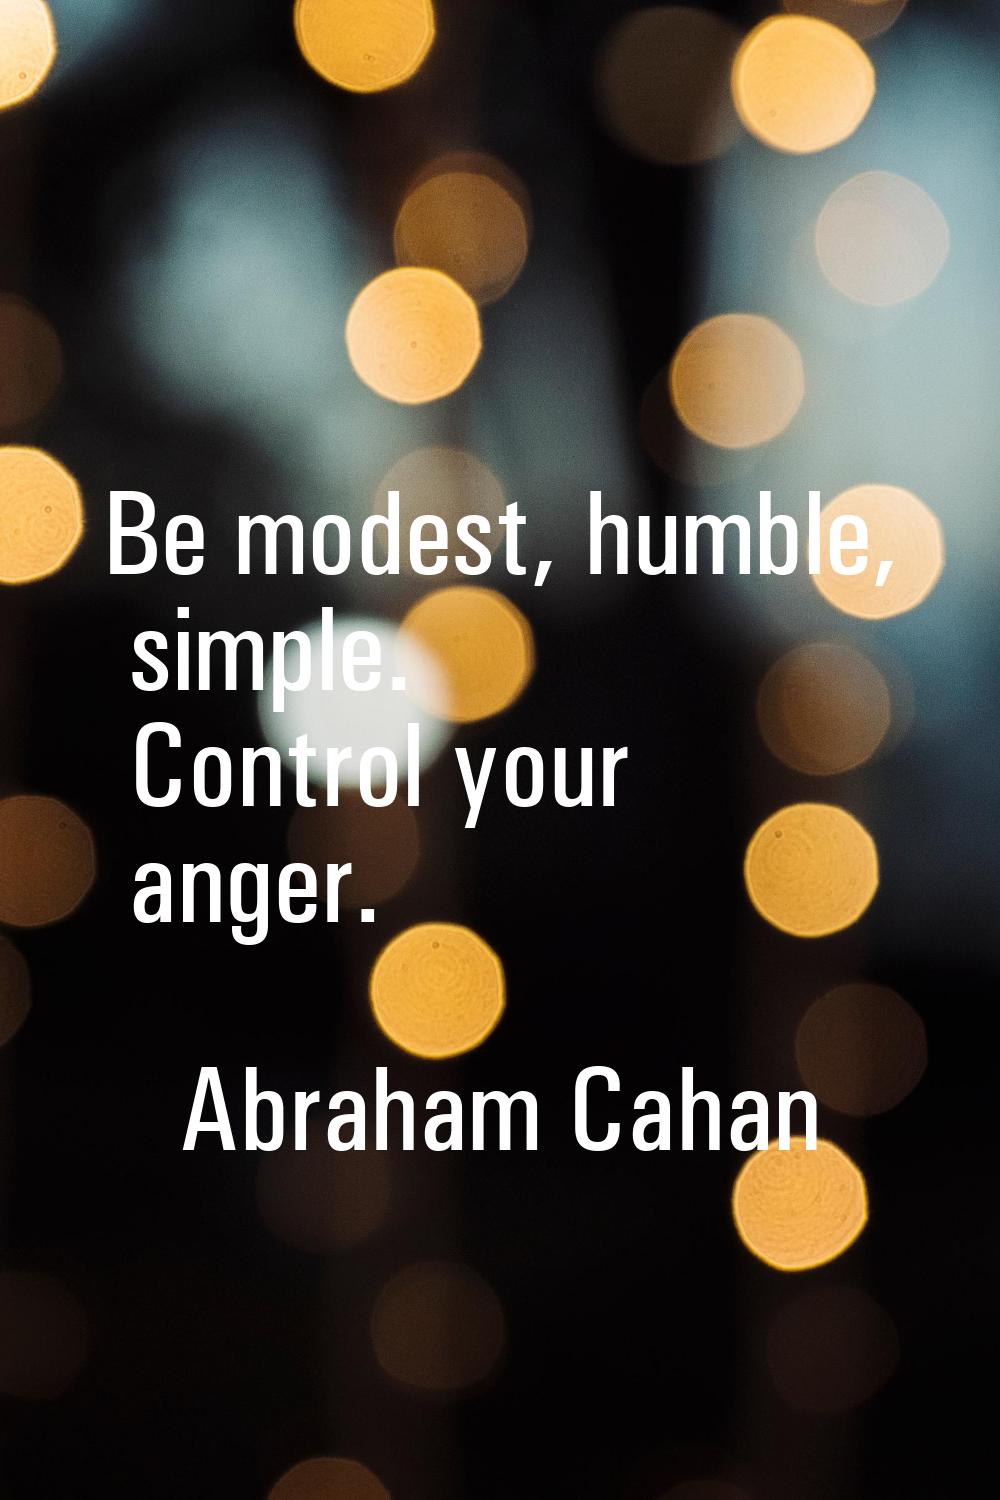 Be modest, humble, simple. Control your anger.